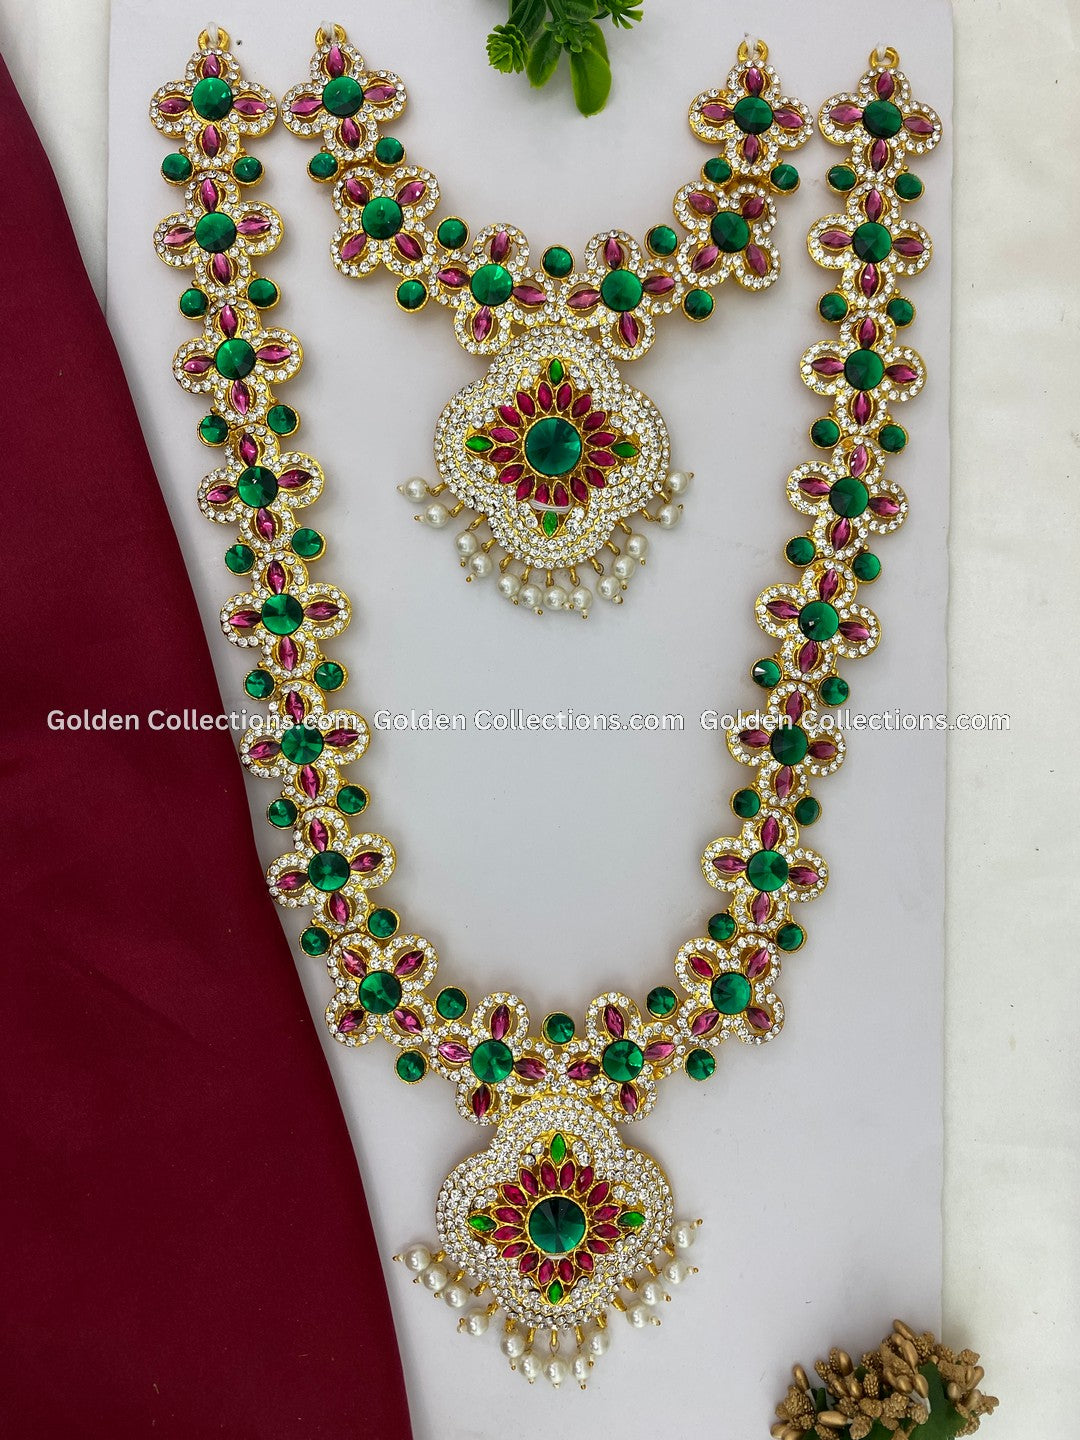 Shop Now Temple Jewellery Online - GoldenCollections